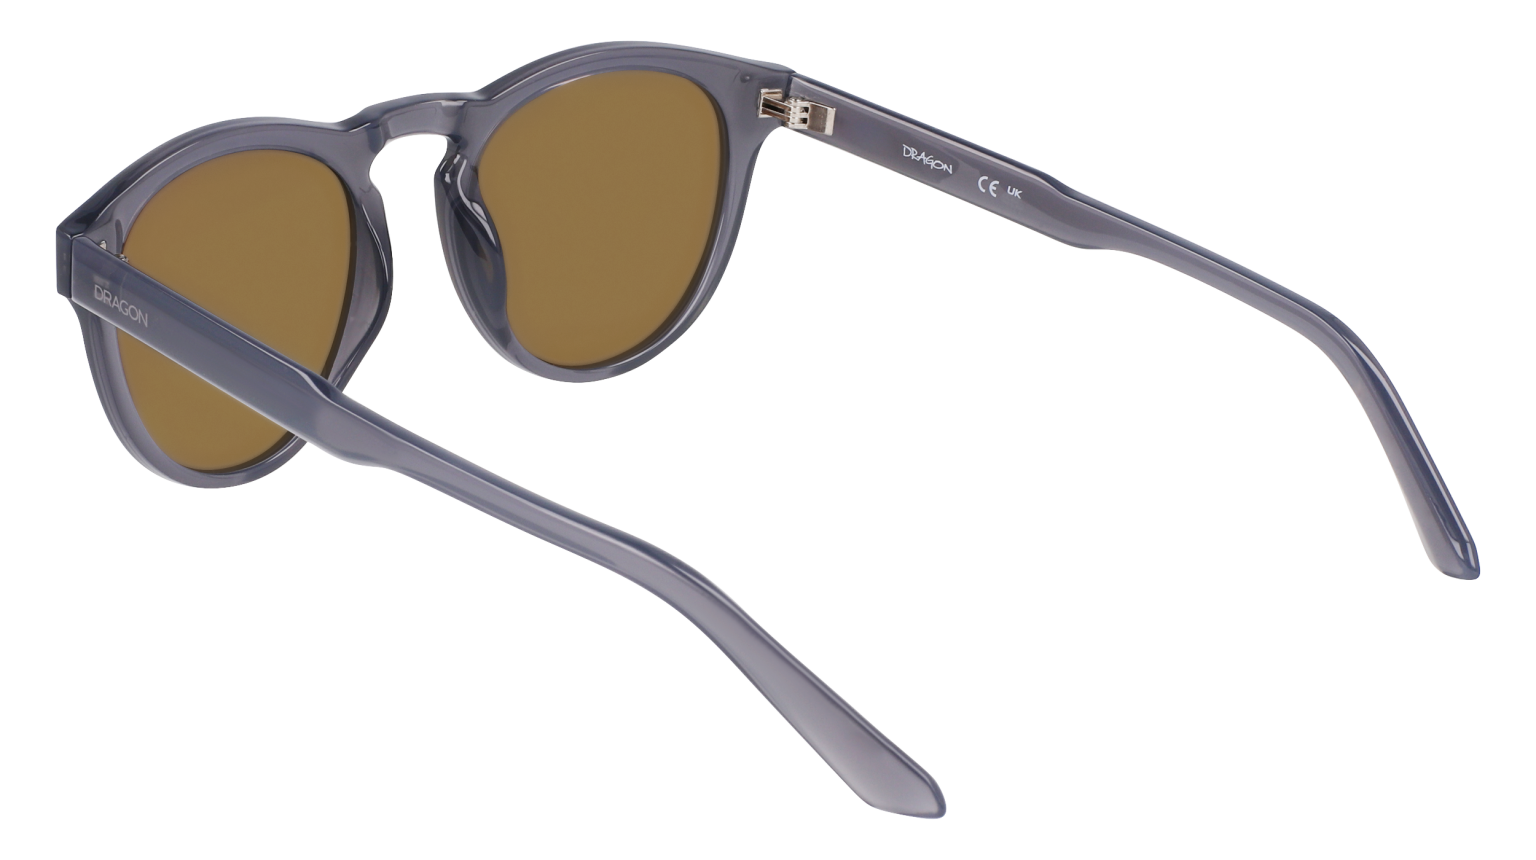 OPUS UPCYCLED - Grey with Lumalens Rose Gold Ionized Lens